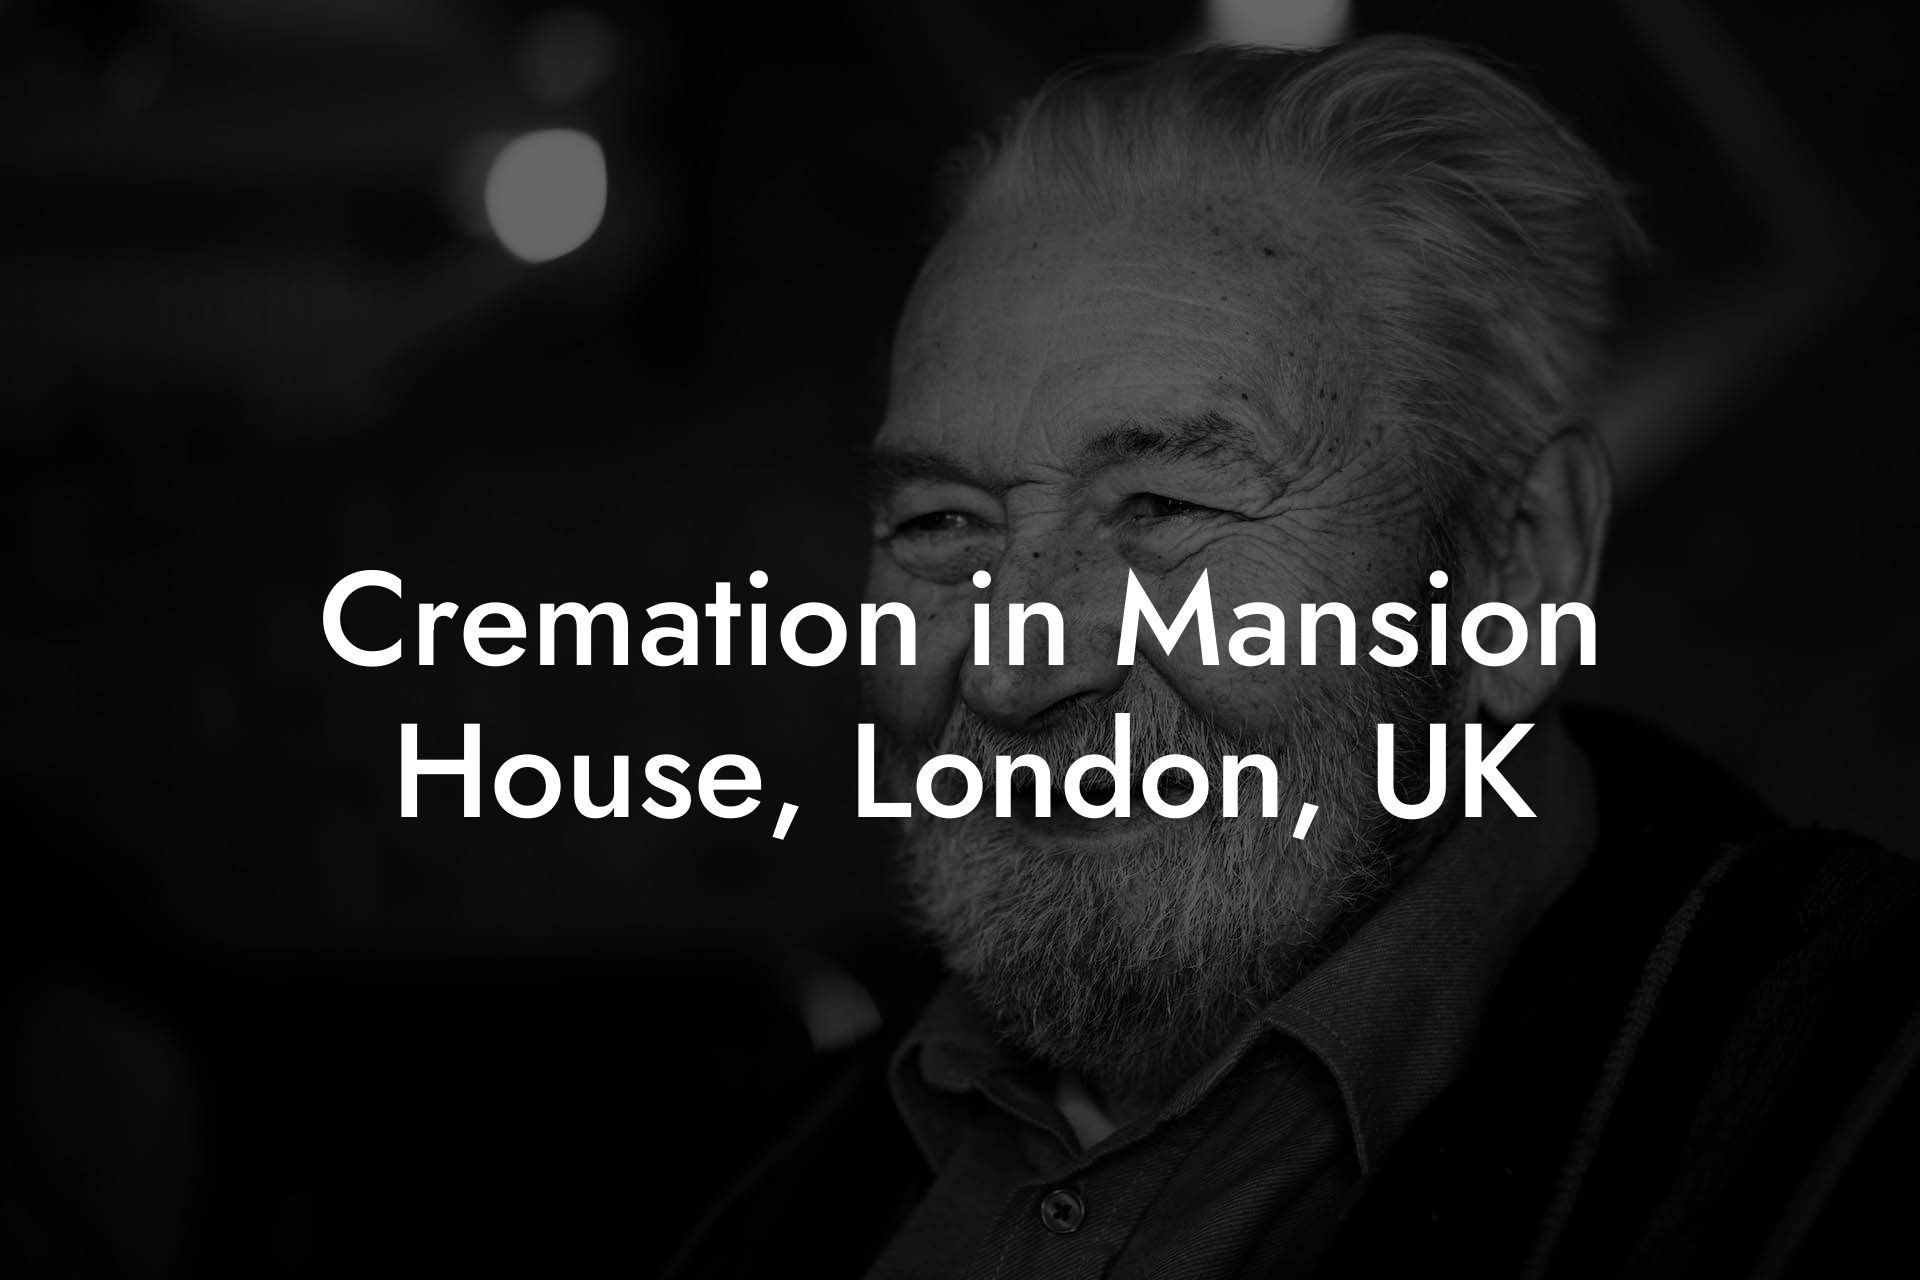 Cremation in Mansion House, London, UK